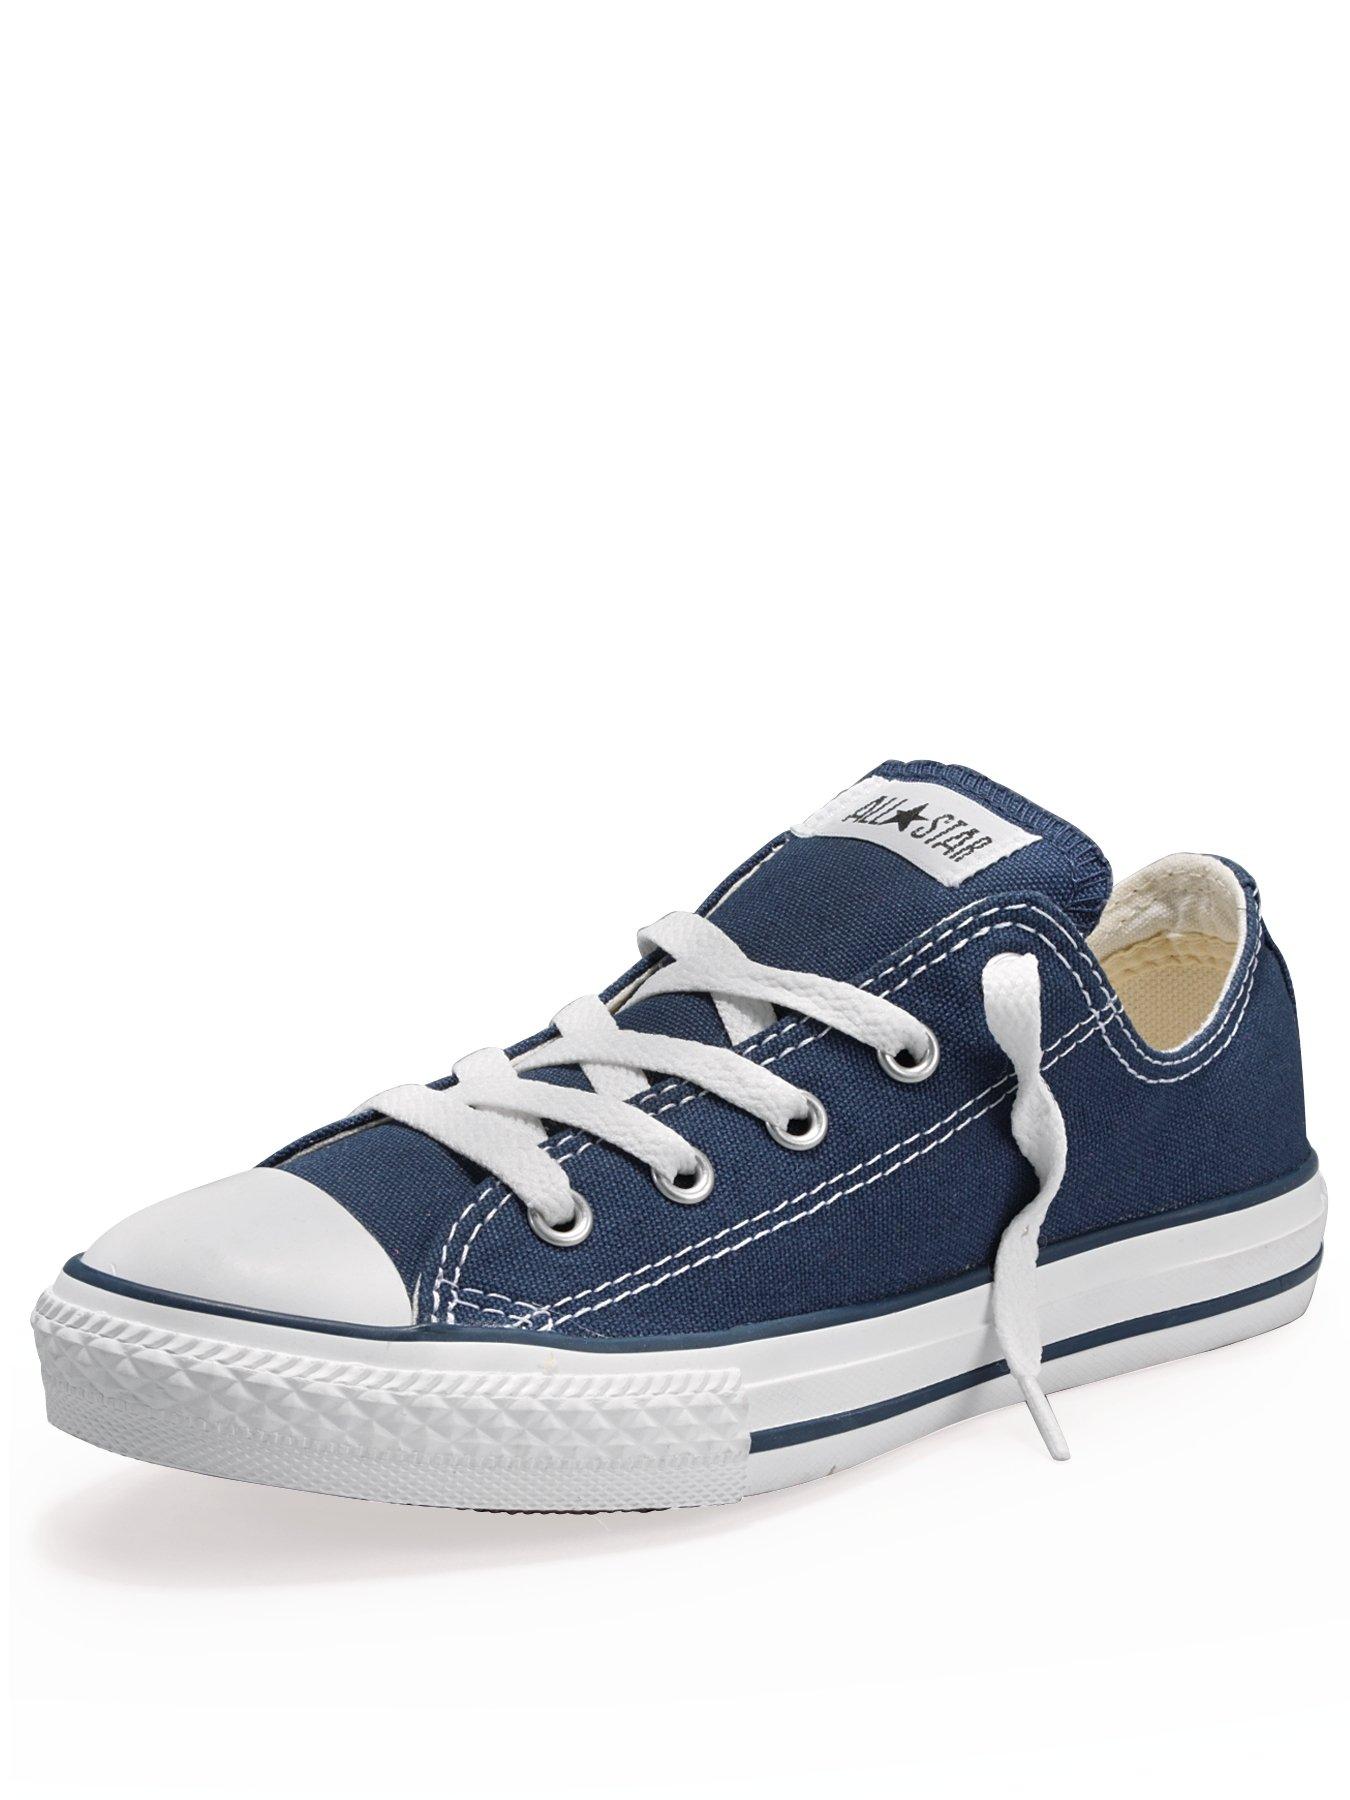 Converse Chuck Taylor All Star Ox Core Childrens Trainer - blue jeans with dark blue converse roblox